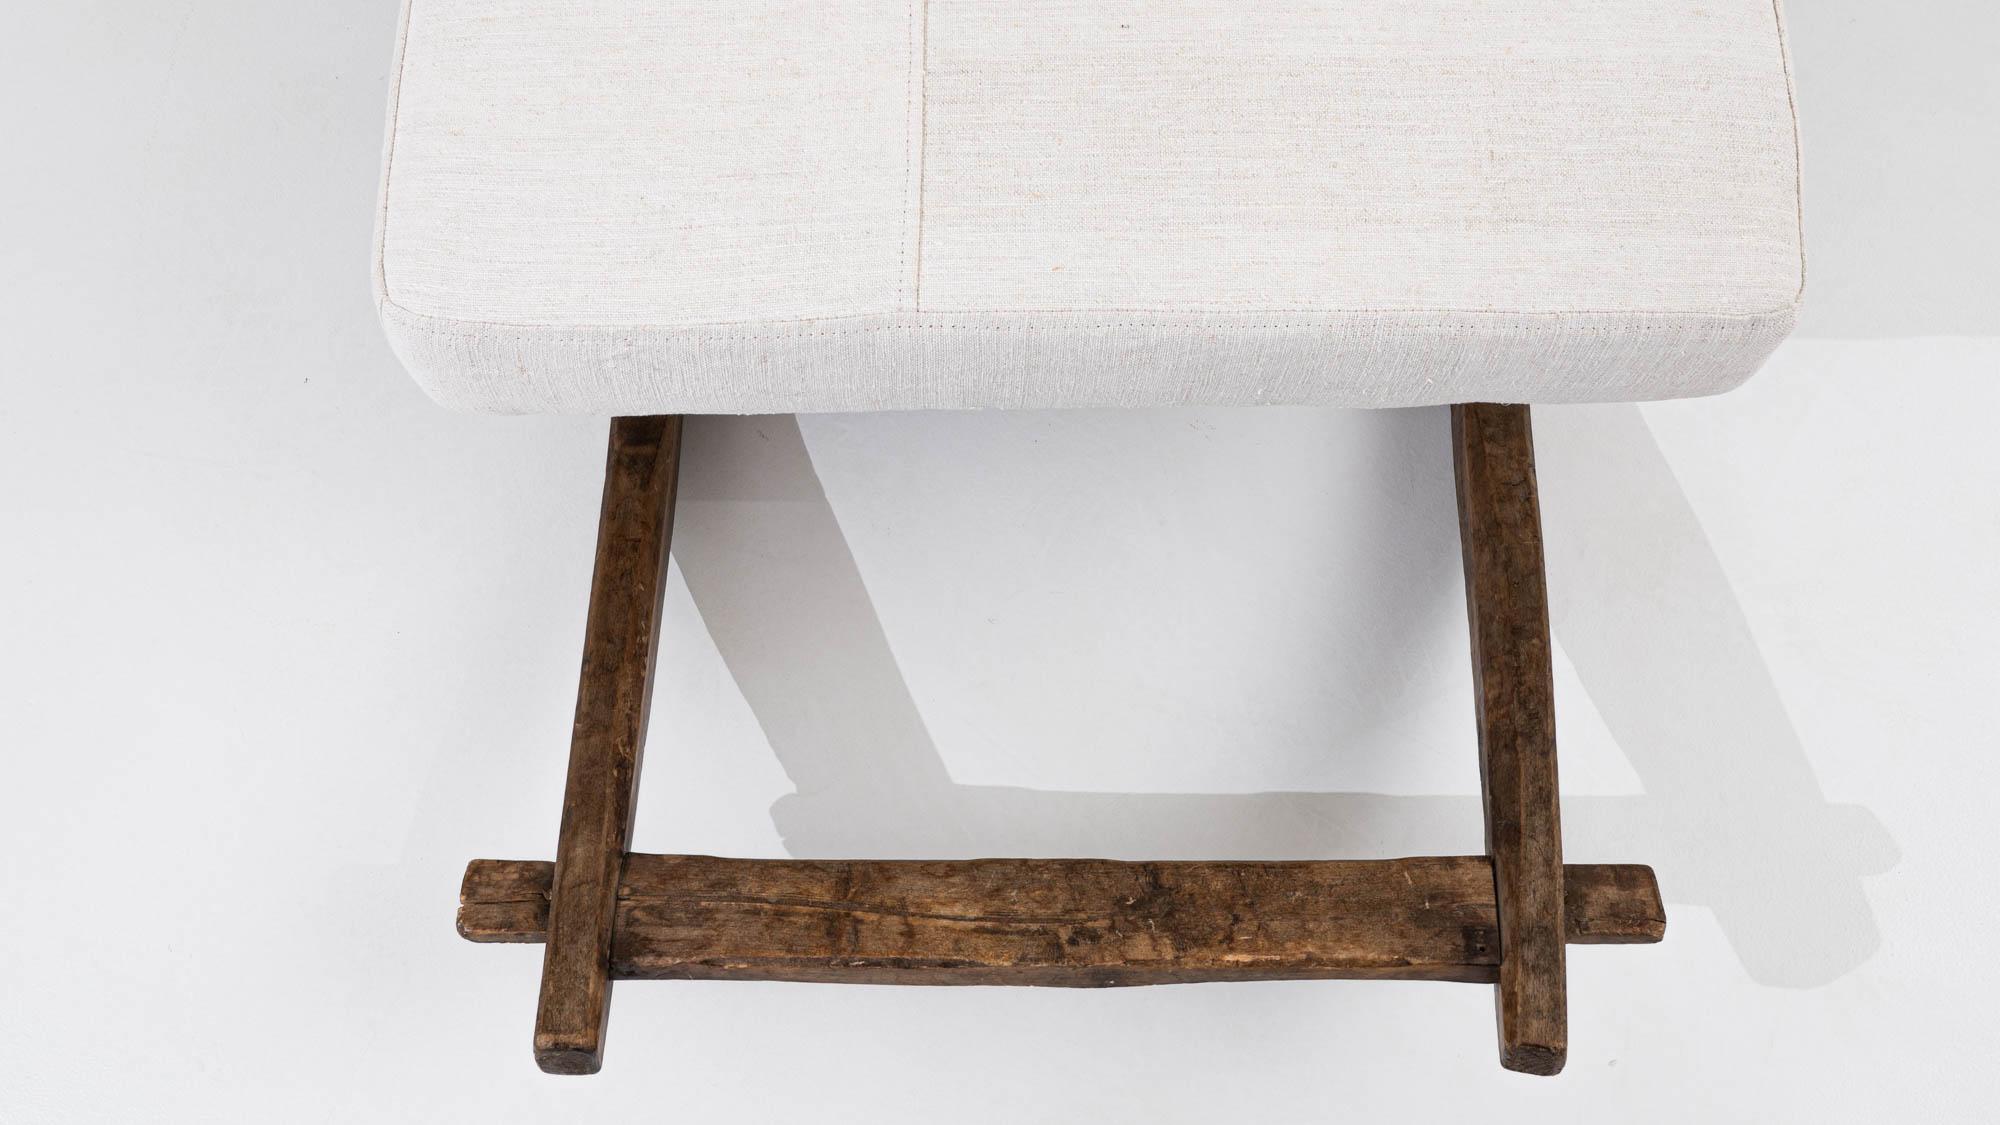 Our Central European 19th Century Wooden Bench, is a timeless piece that seamlessly blends elegance with antique charm. Crafted with precision from durable wood, this bench showcases the exquisite craftsmanship of a bygone era. The warm, rich wood